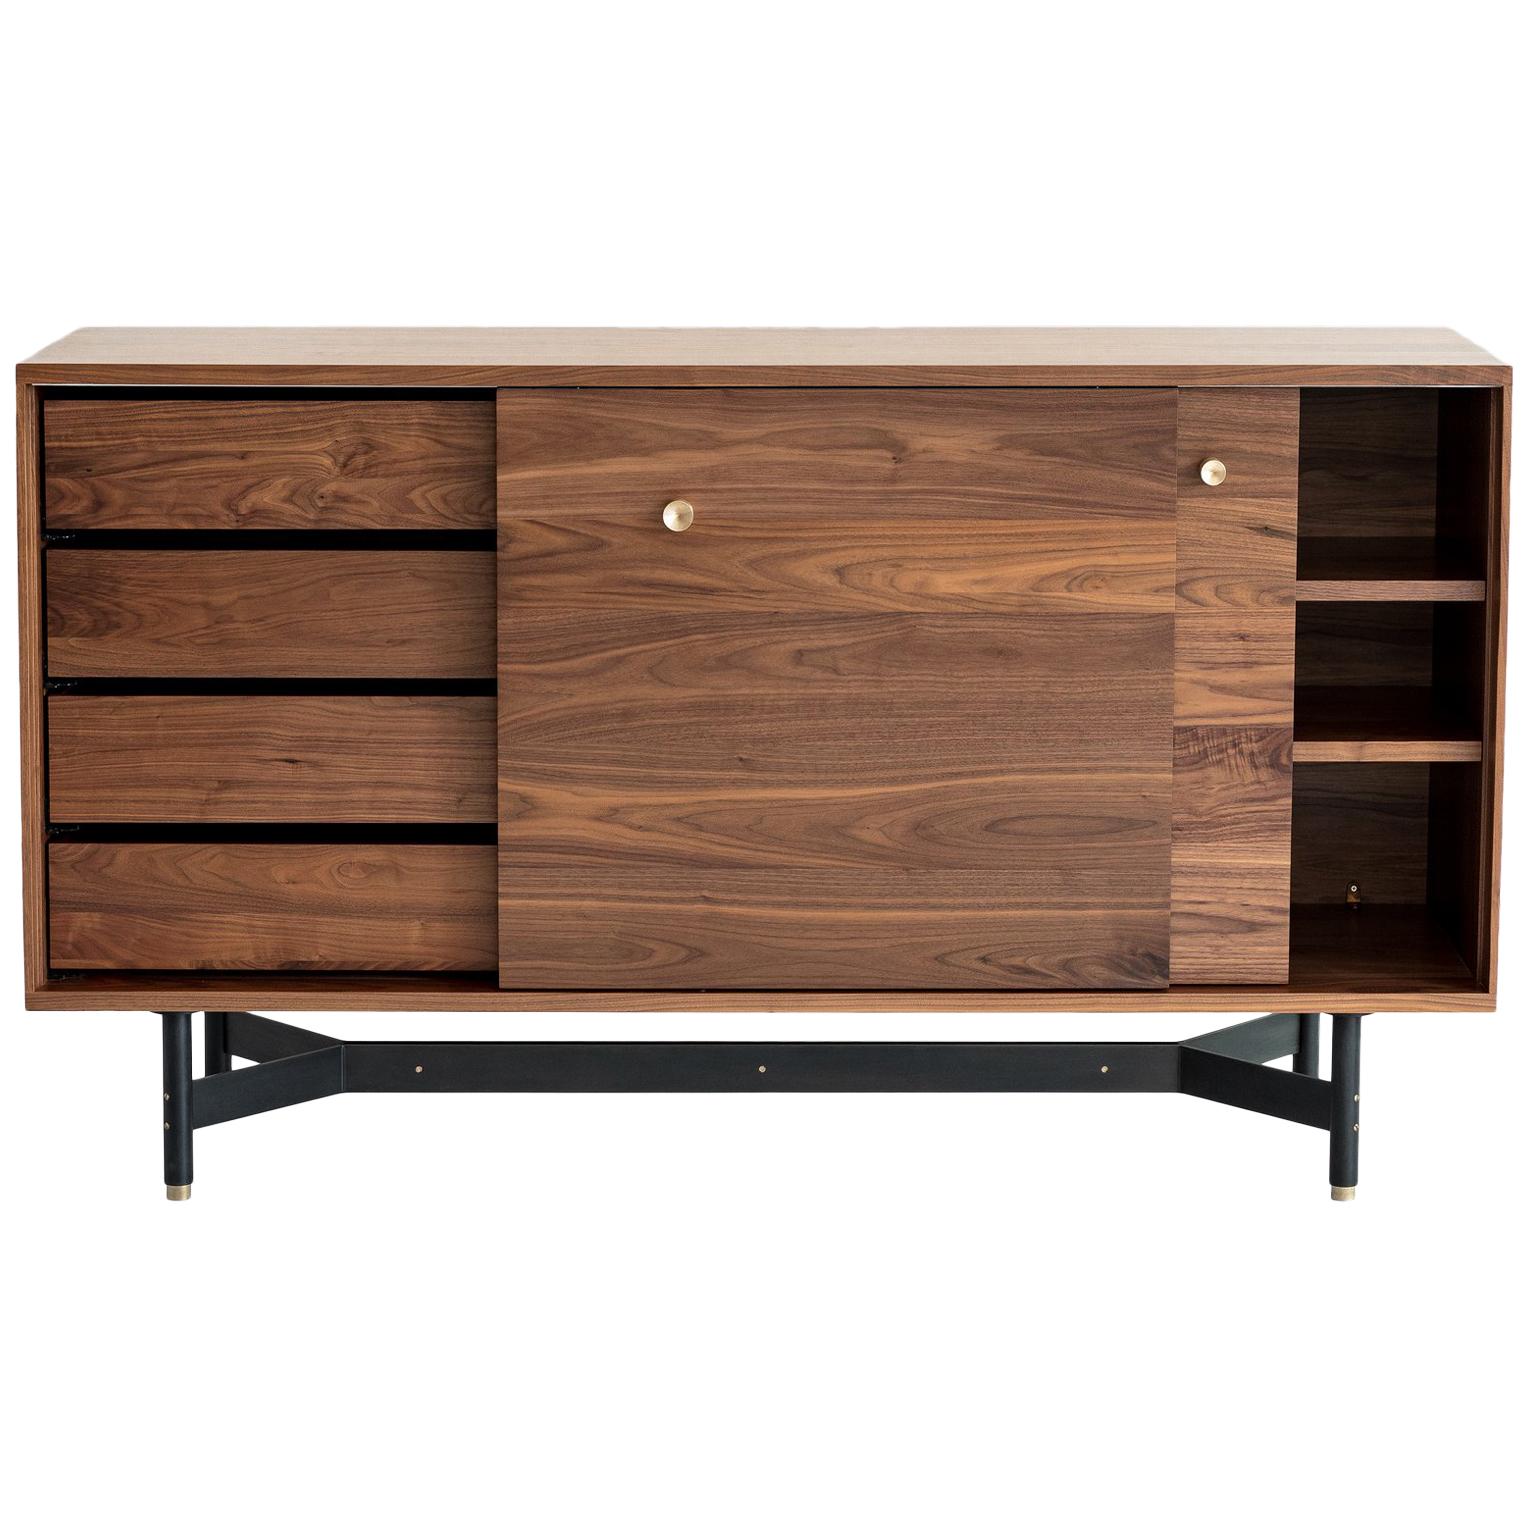 Ac10 Walnut Dresser Console with Drawers, Steel Base and Bronze Accents For Sale